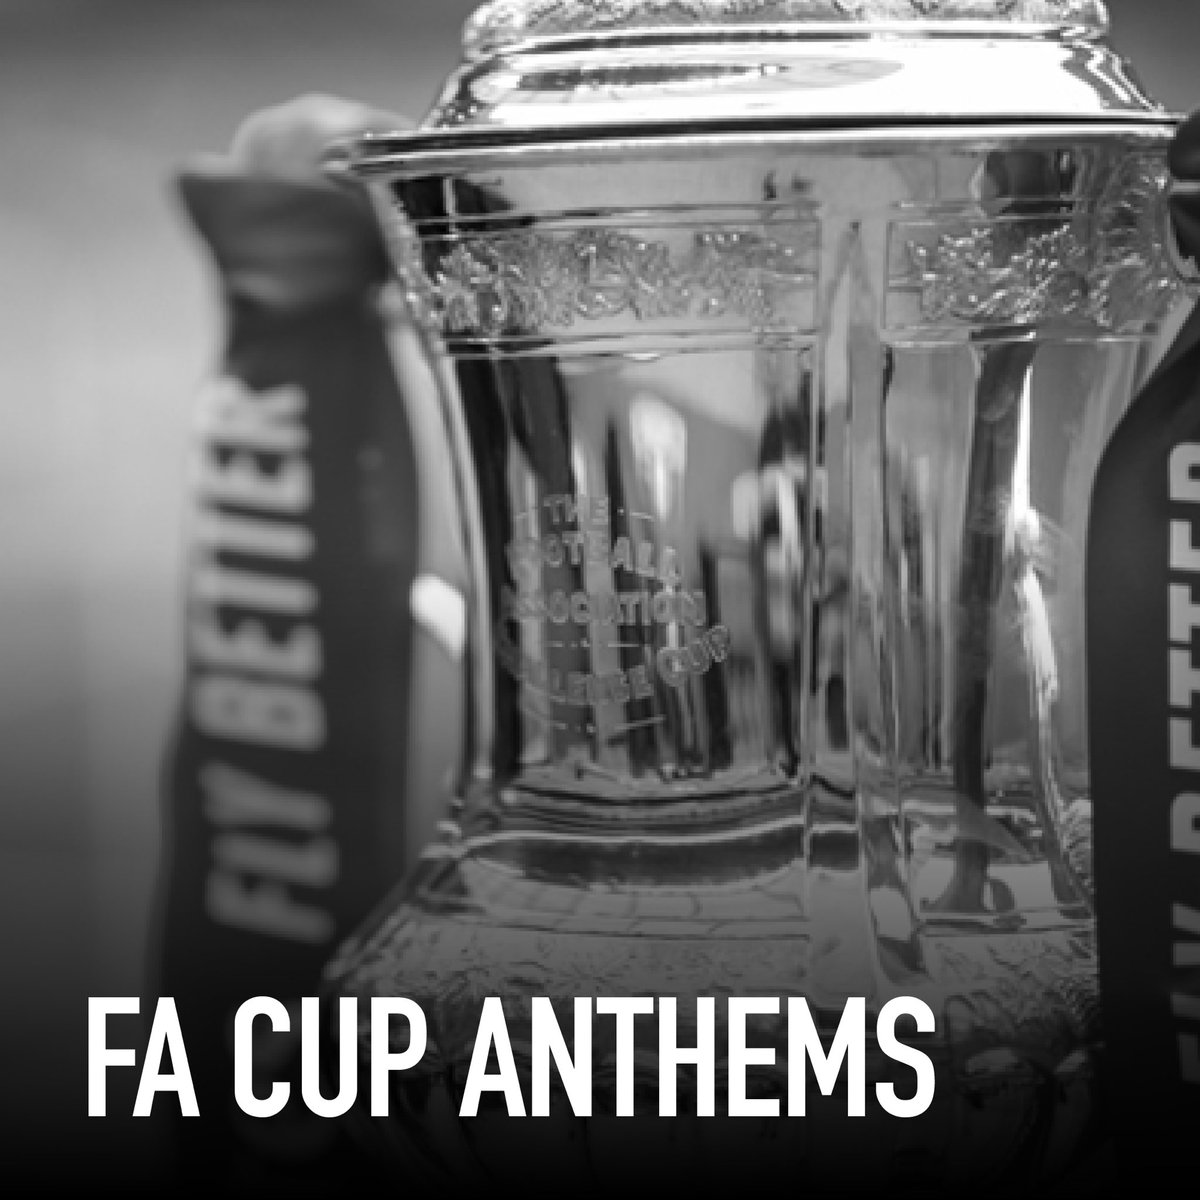 ‘Get Out' has been added to the Official FA Cup Anthems playlist on @AppleMusic !! listen here - bit.ly/3GmA4Jy #EmiratesFACup